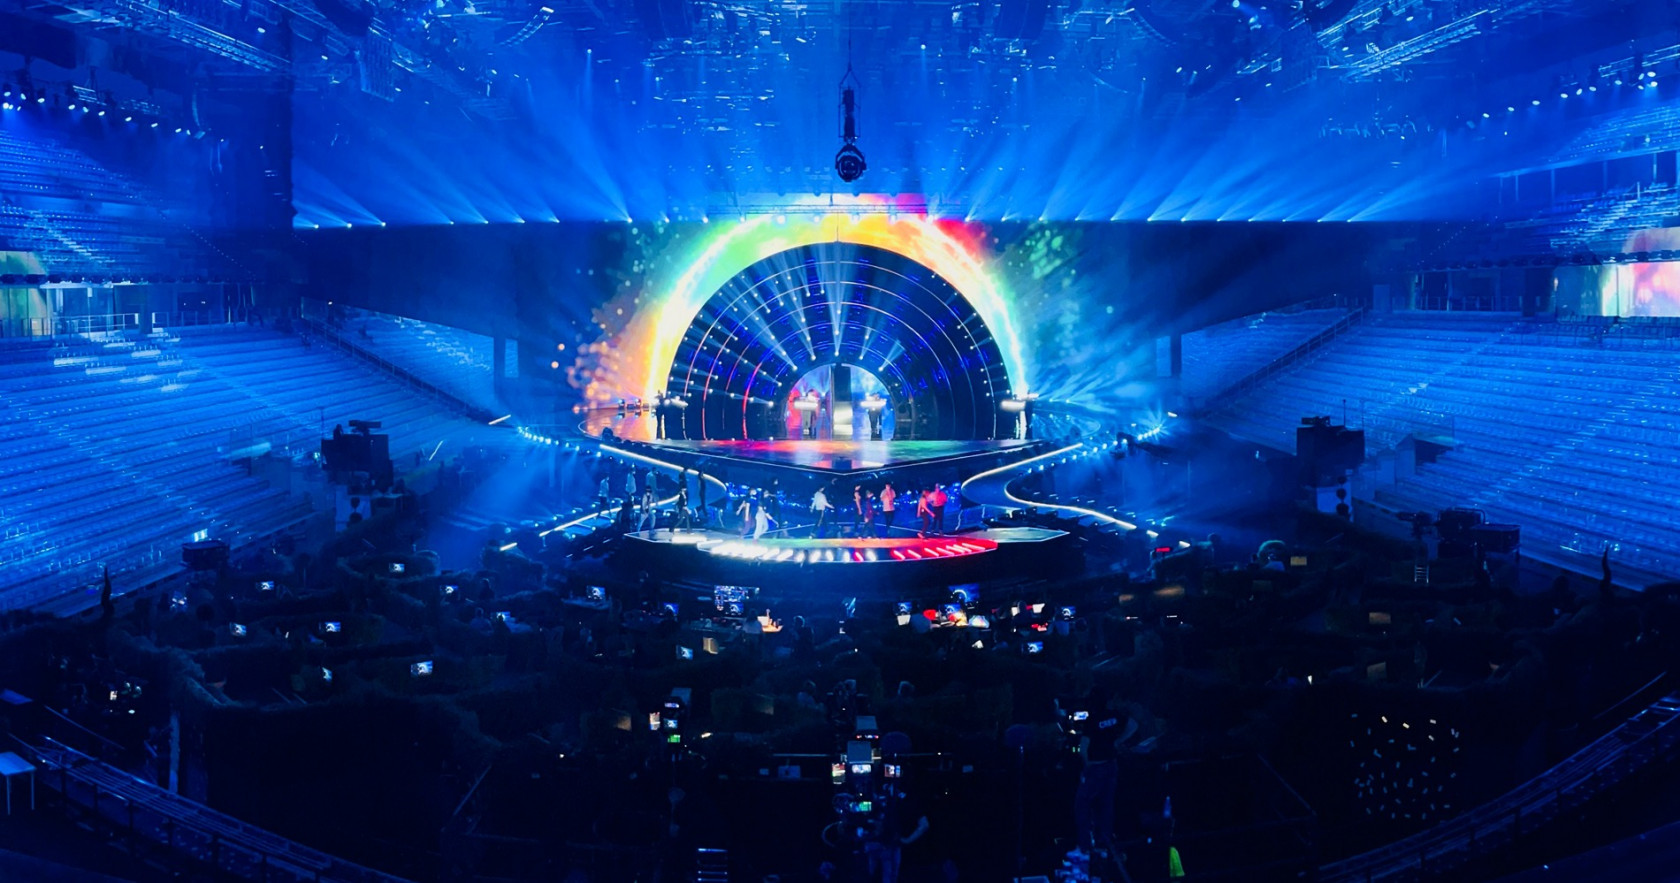 Eurovision 2022: The stage will not be used as it was intended to be